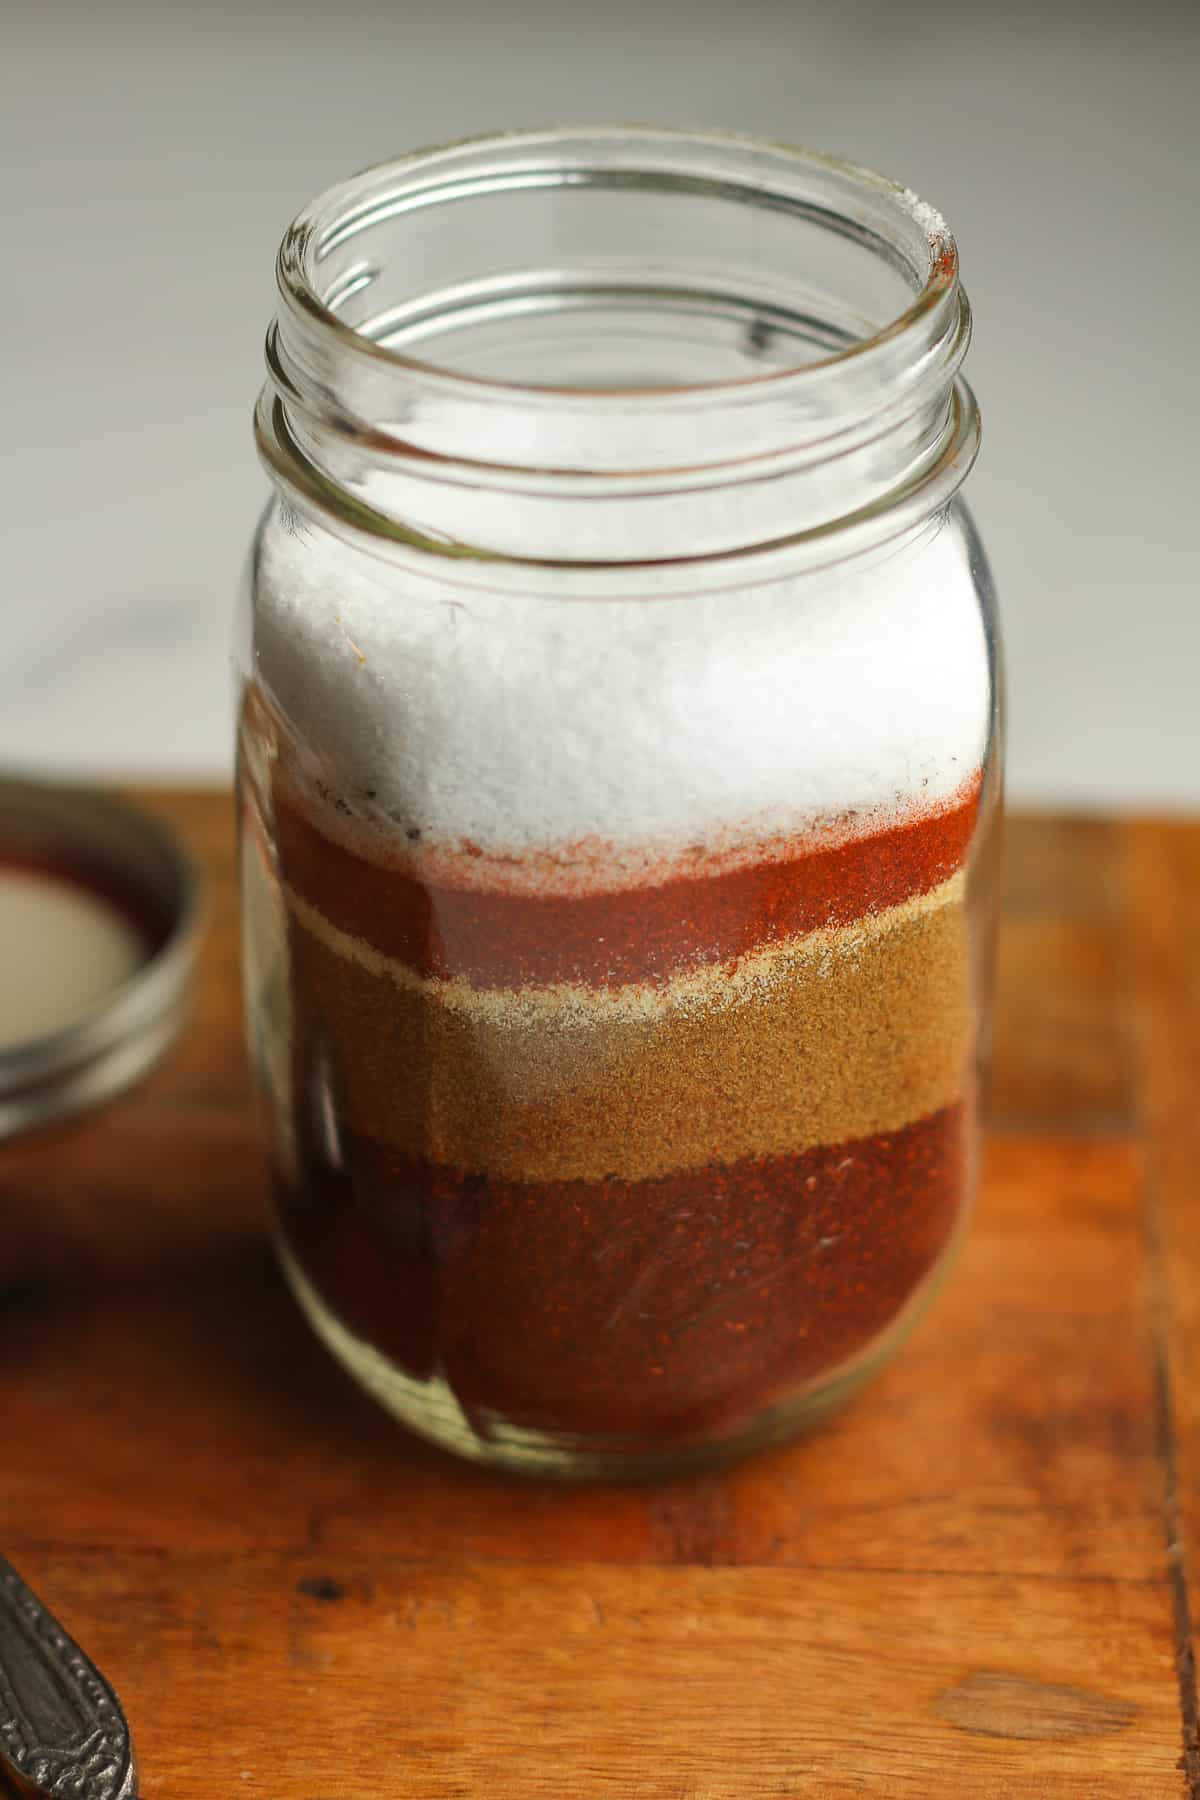 A side view of a jar of the layered homemade taco seasoning.